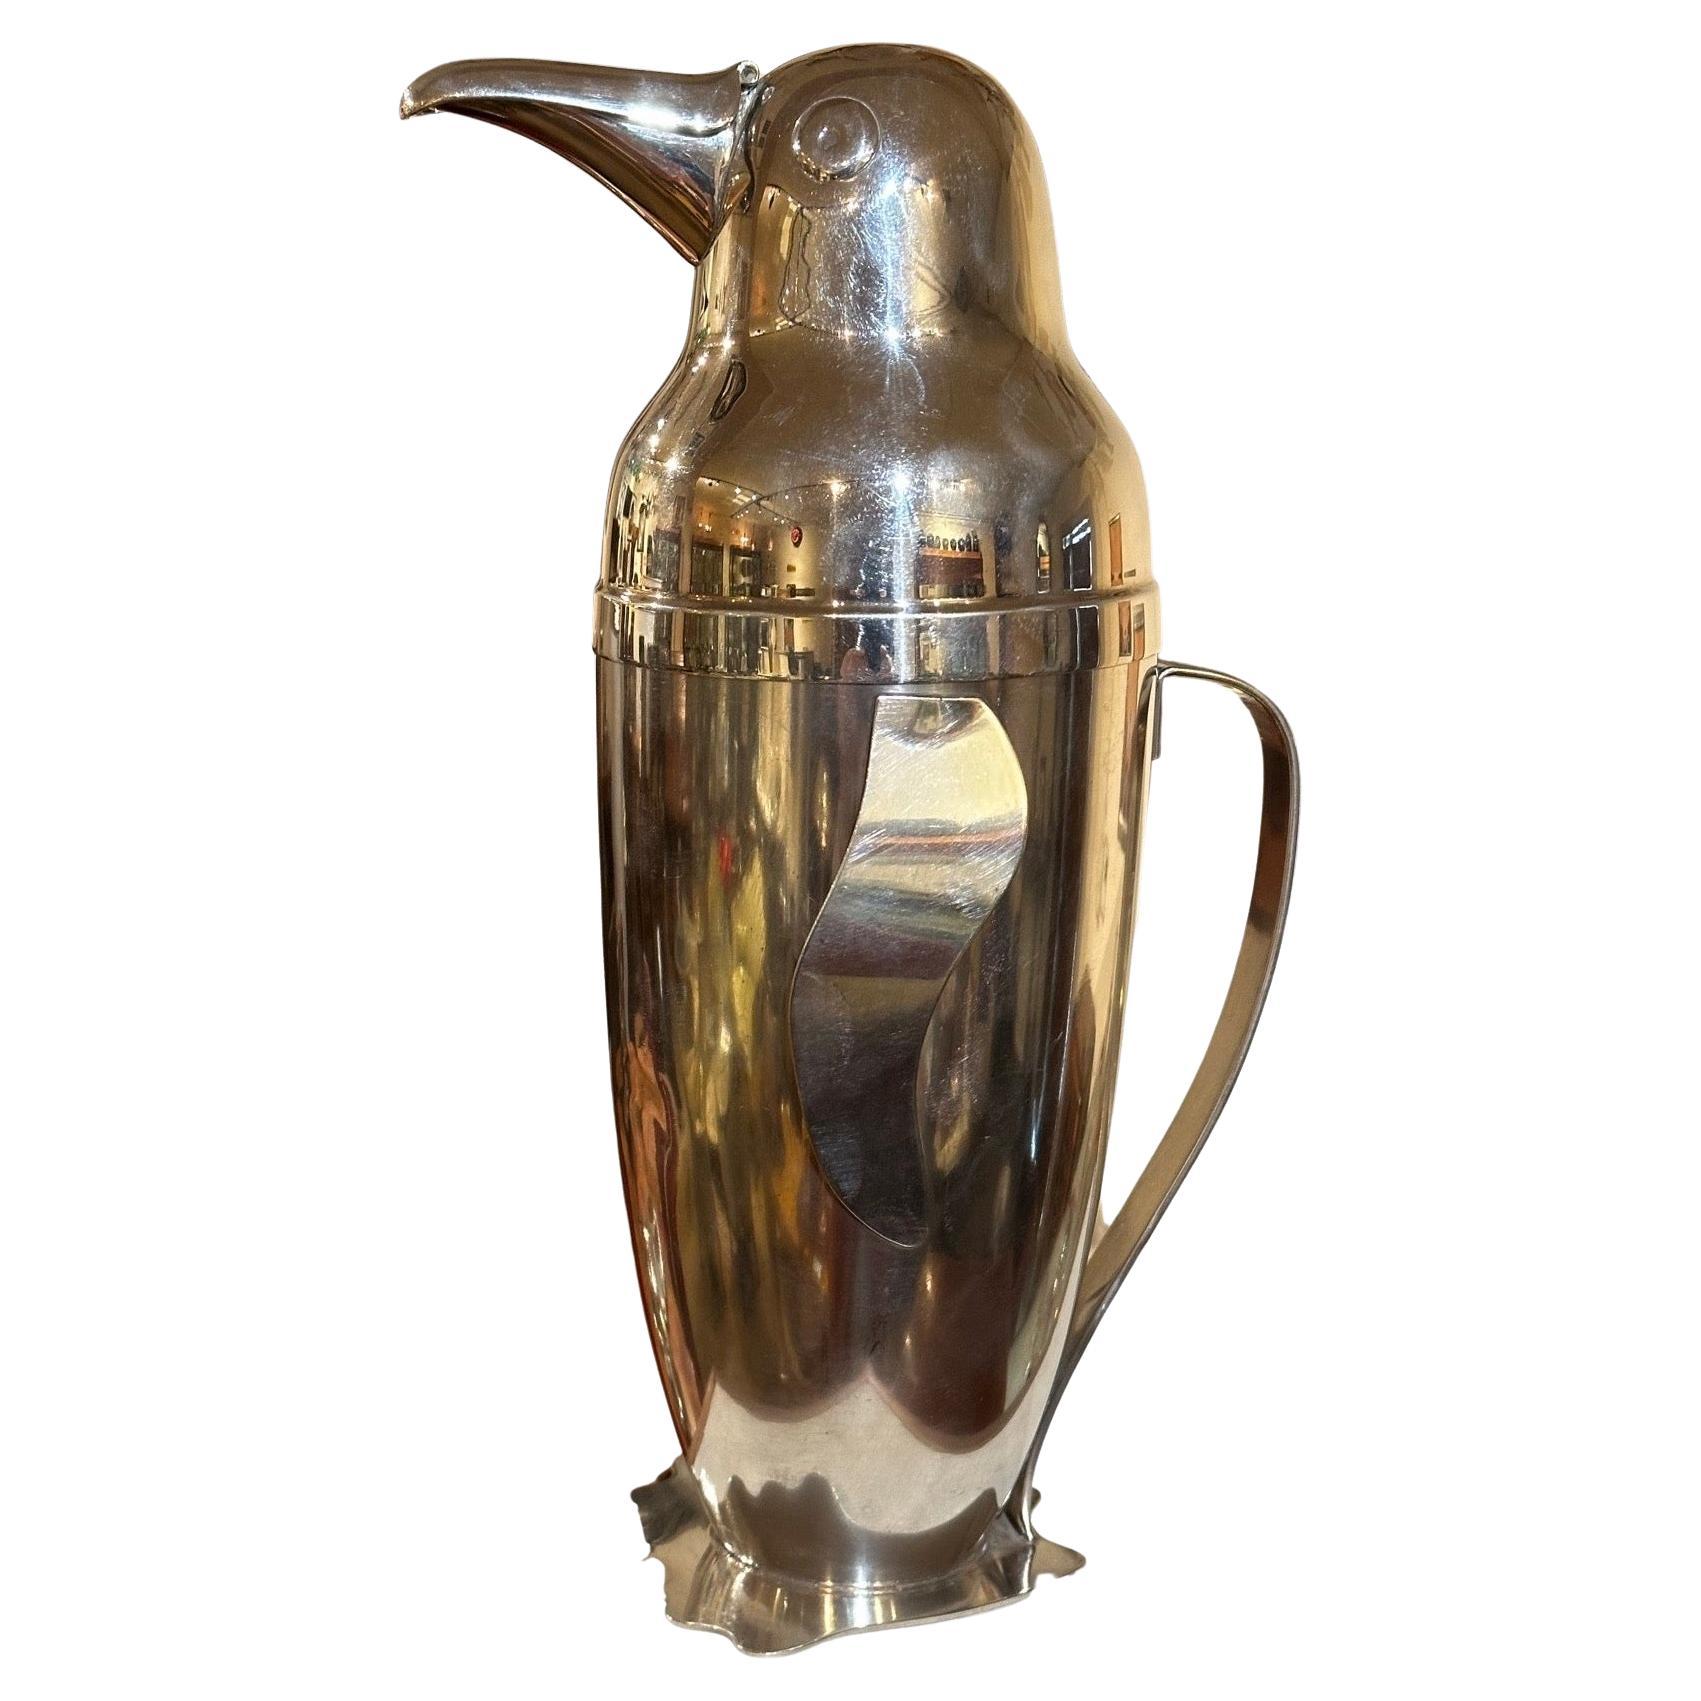 Napier Silver-Plated Penguin Cocktail Shaker, 1936